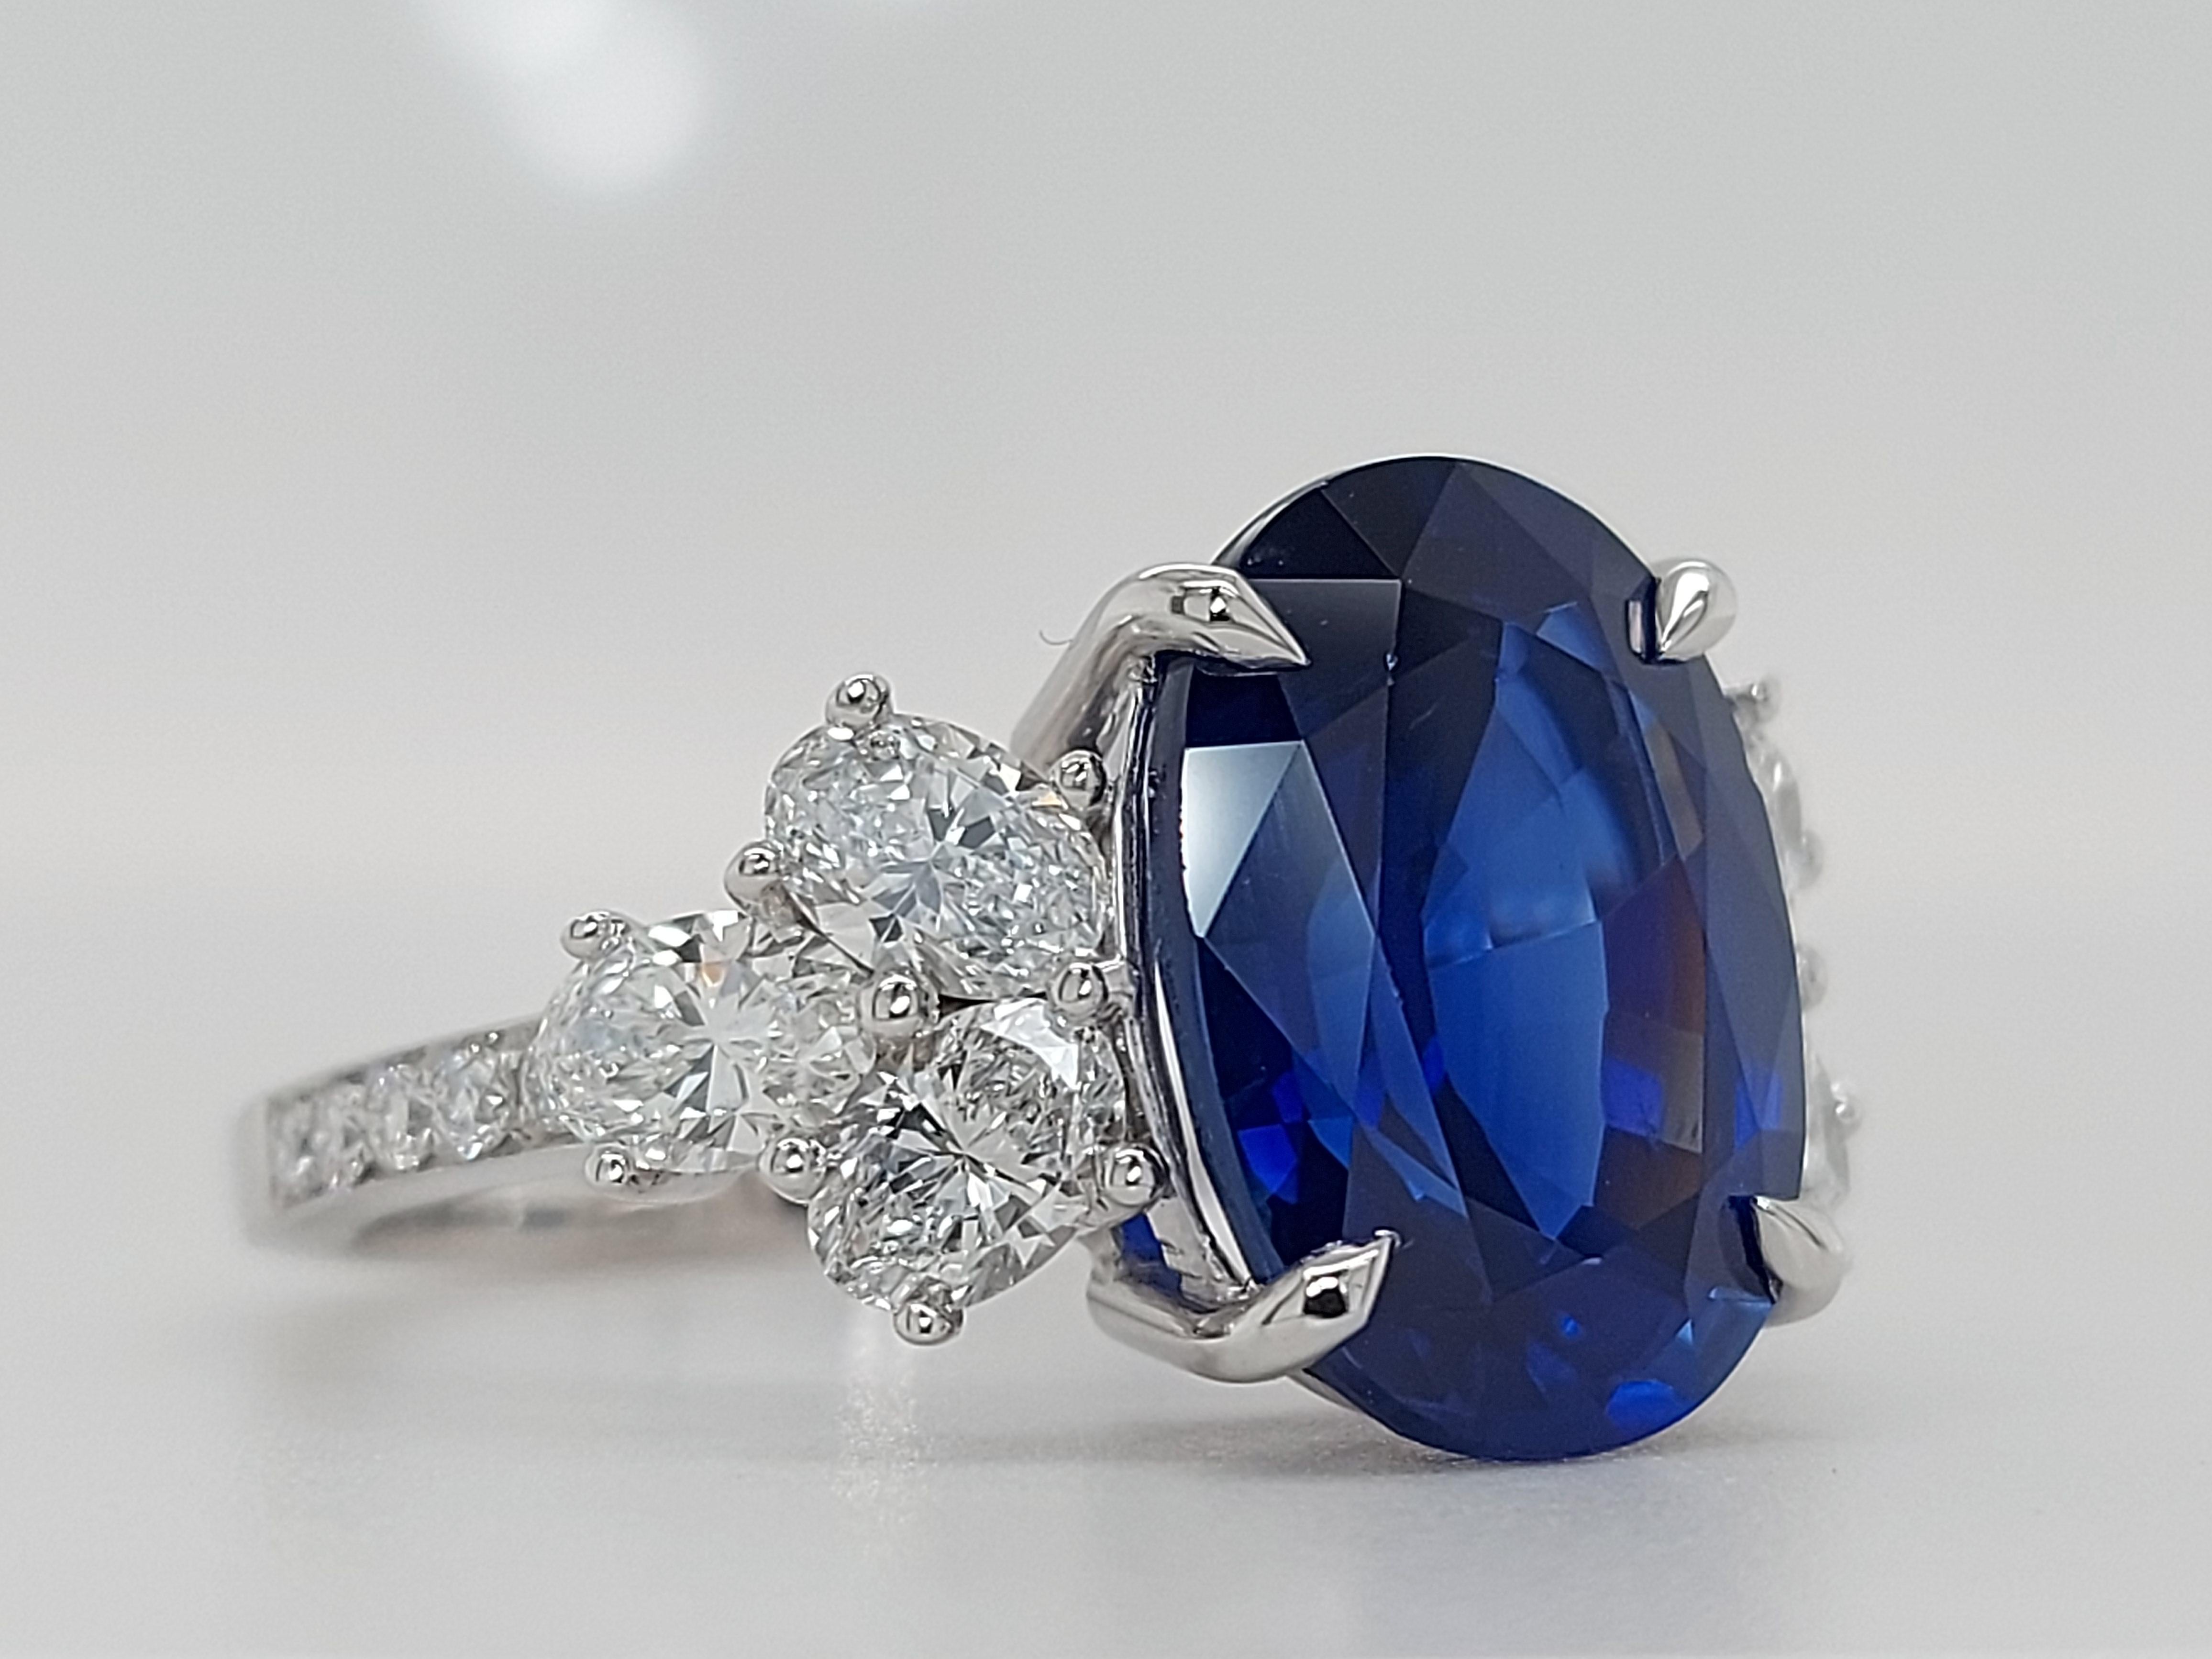 18 Karat White Gold Ring Set with a 7 Carat Sapphire and Diamonds 3